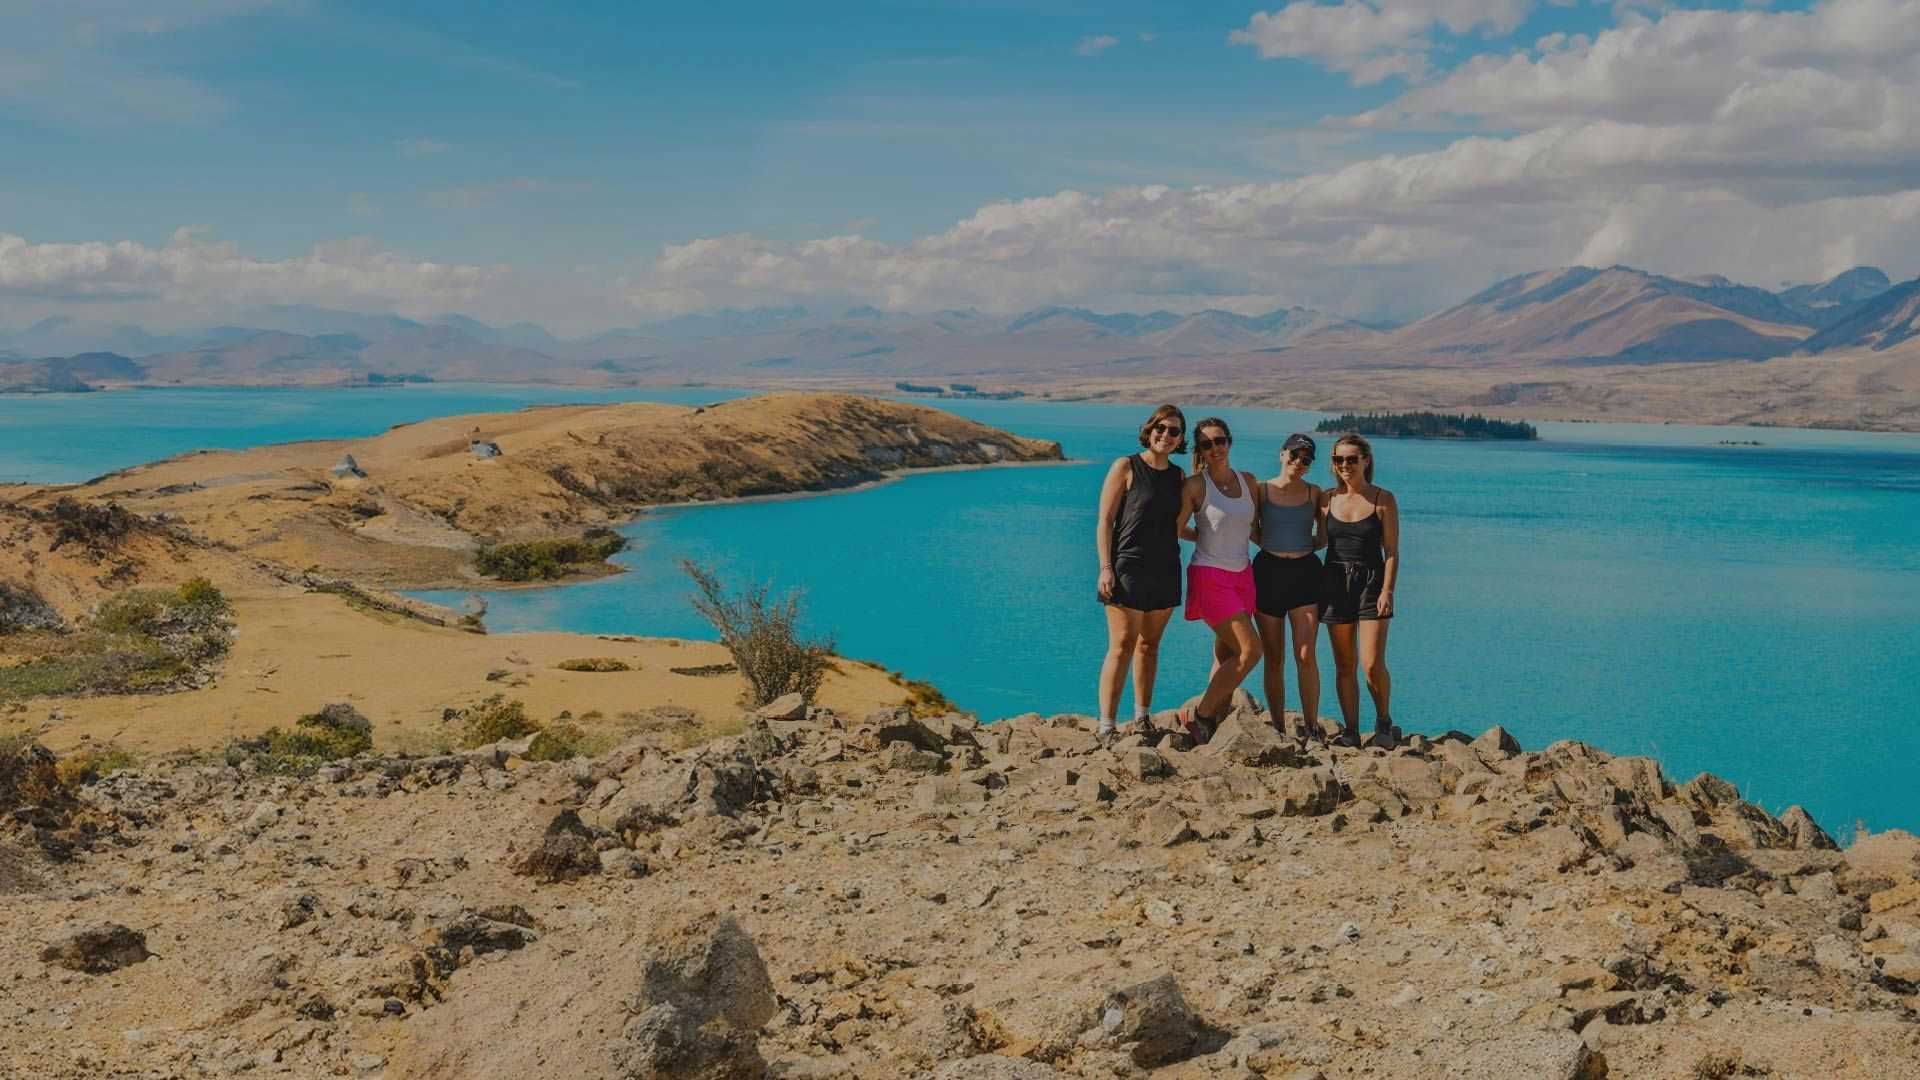 Group of women posing for a photo overlooking Lake Tekapo in New Zealand